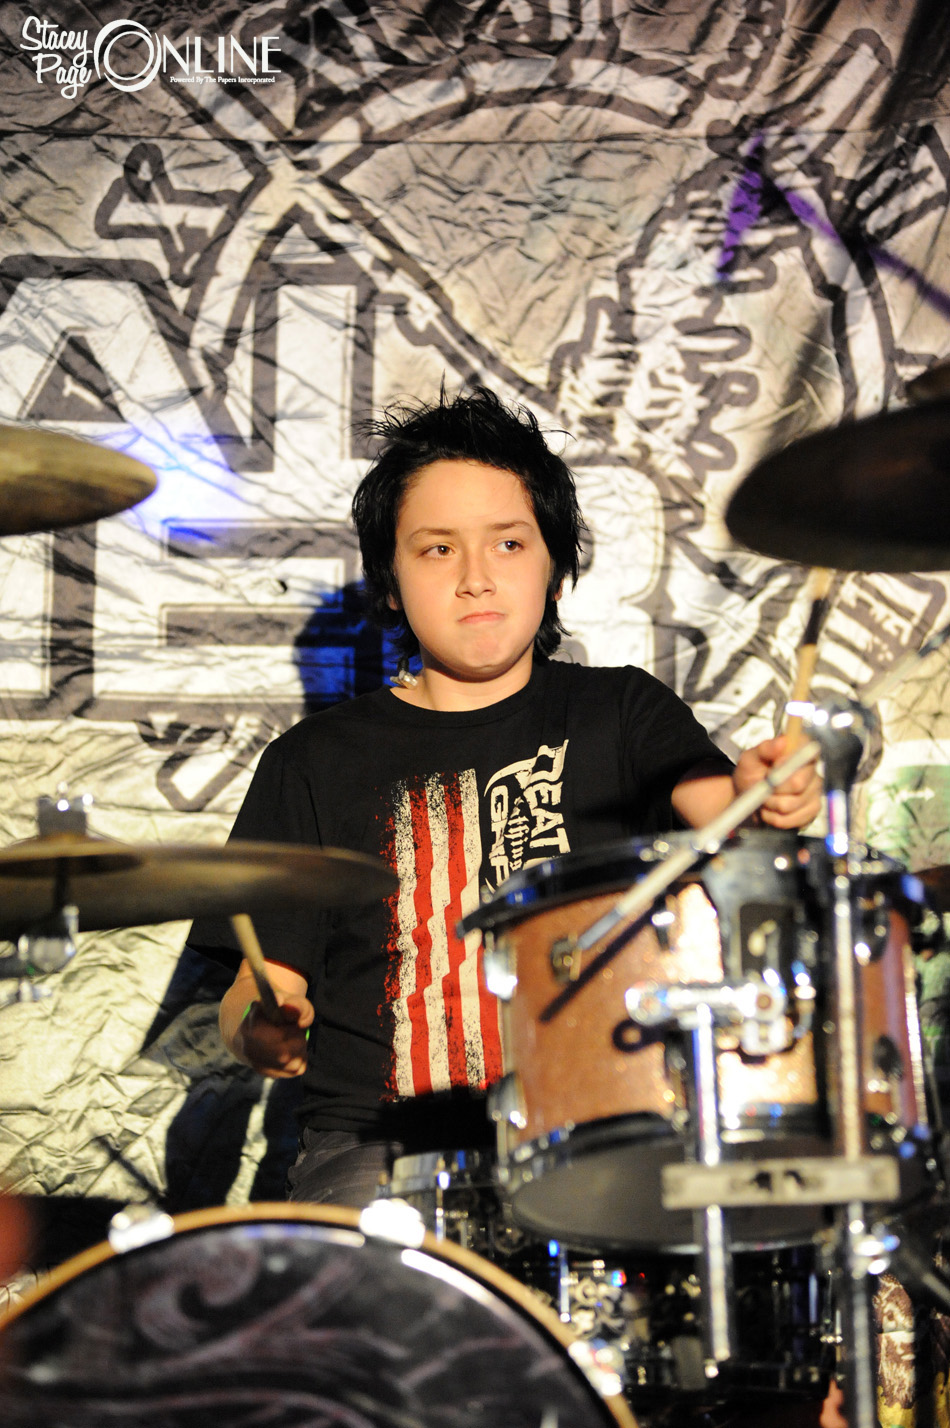 Austin Rios, 12, guest starred on the skins for several shows on the Digital Summer tour.